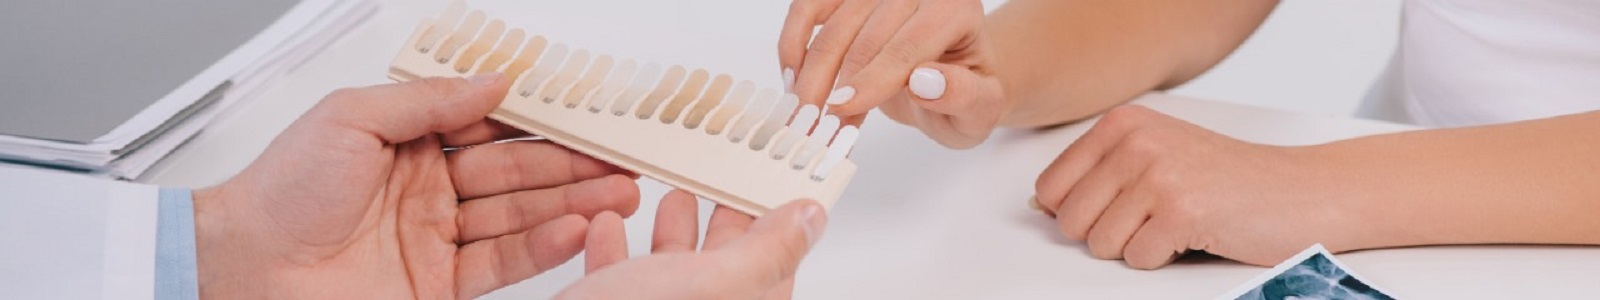 Bone Density Test and bone scan for osteoporosis/>
        </div>
    </div>
</div>

<section class=